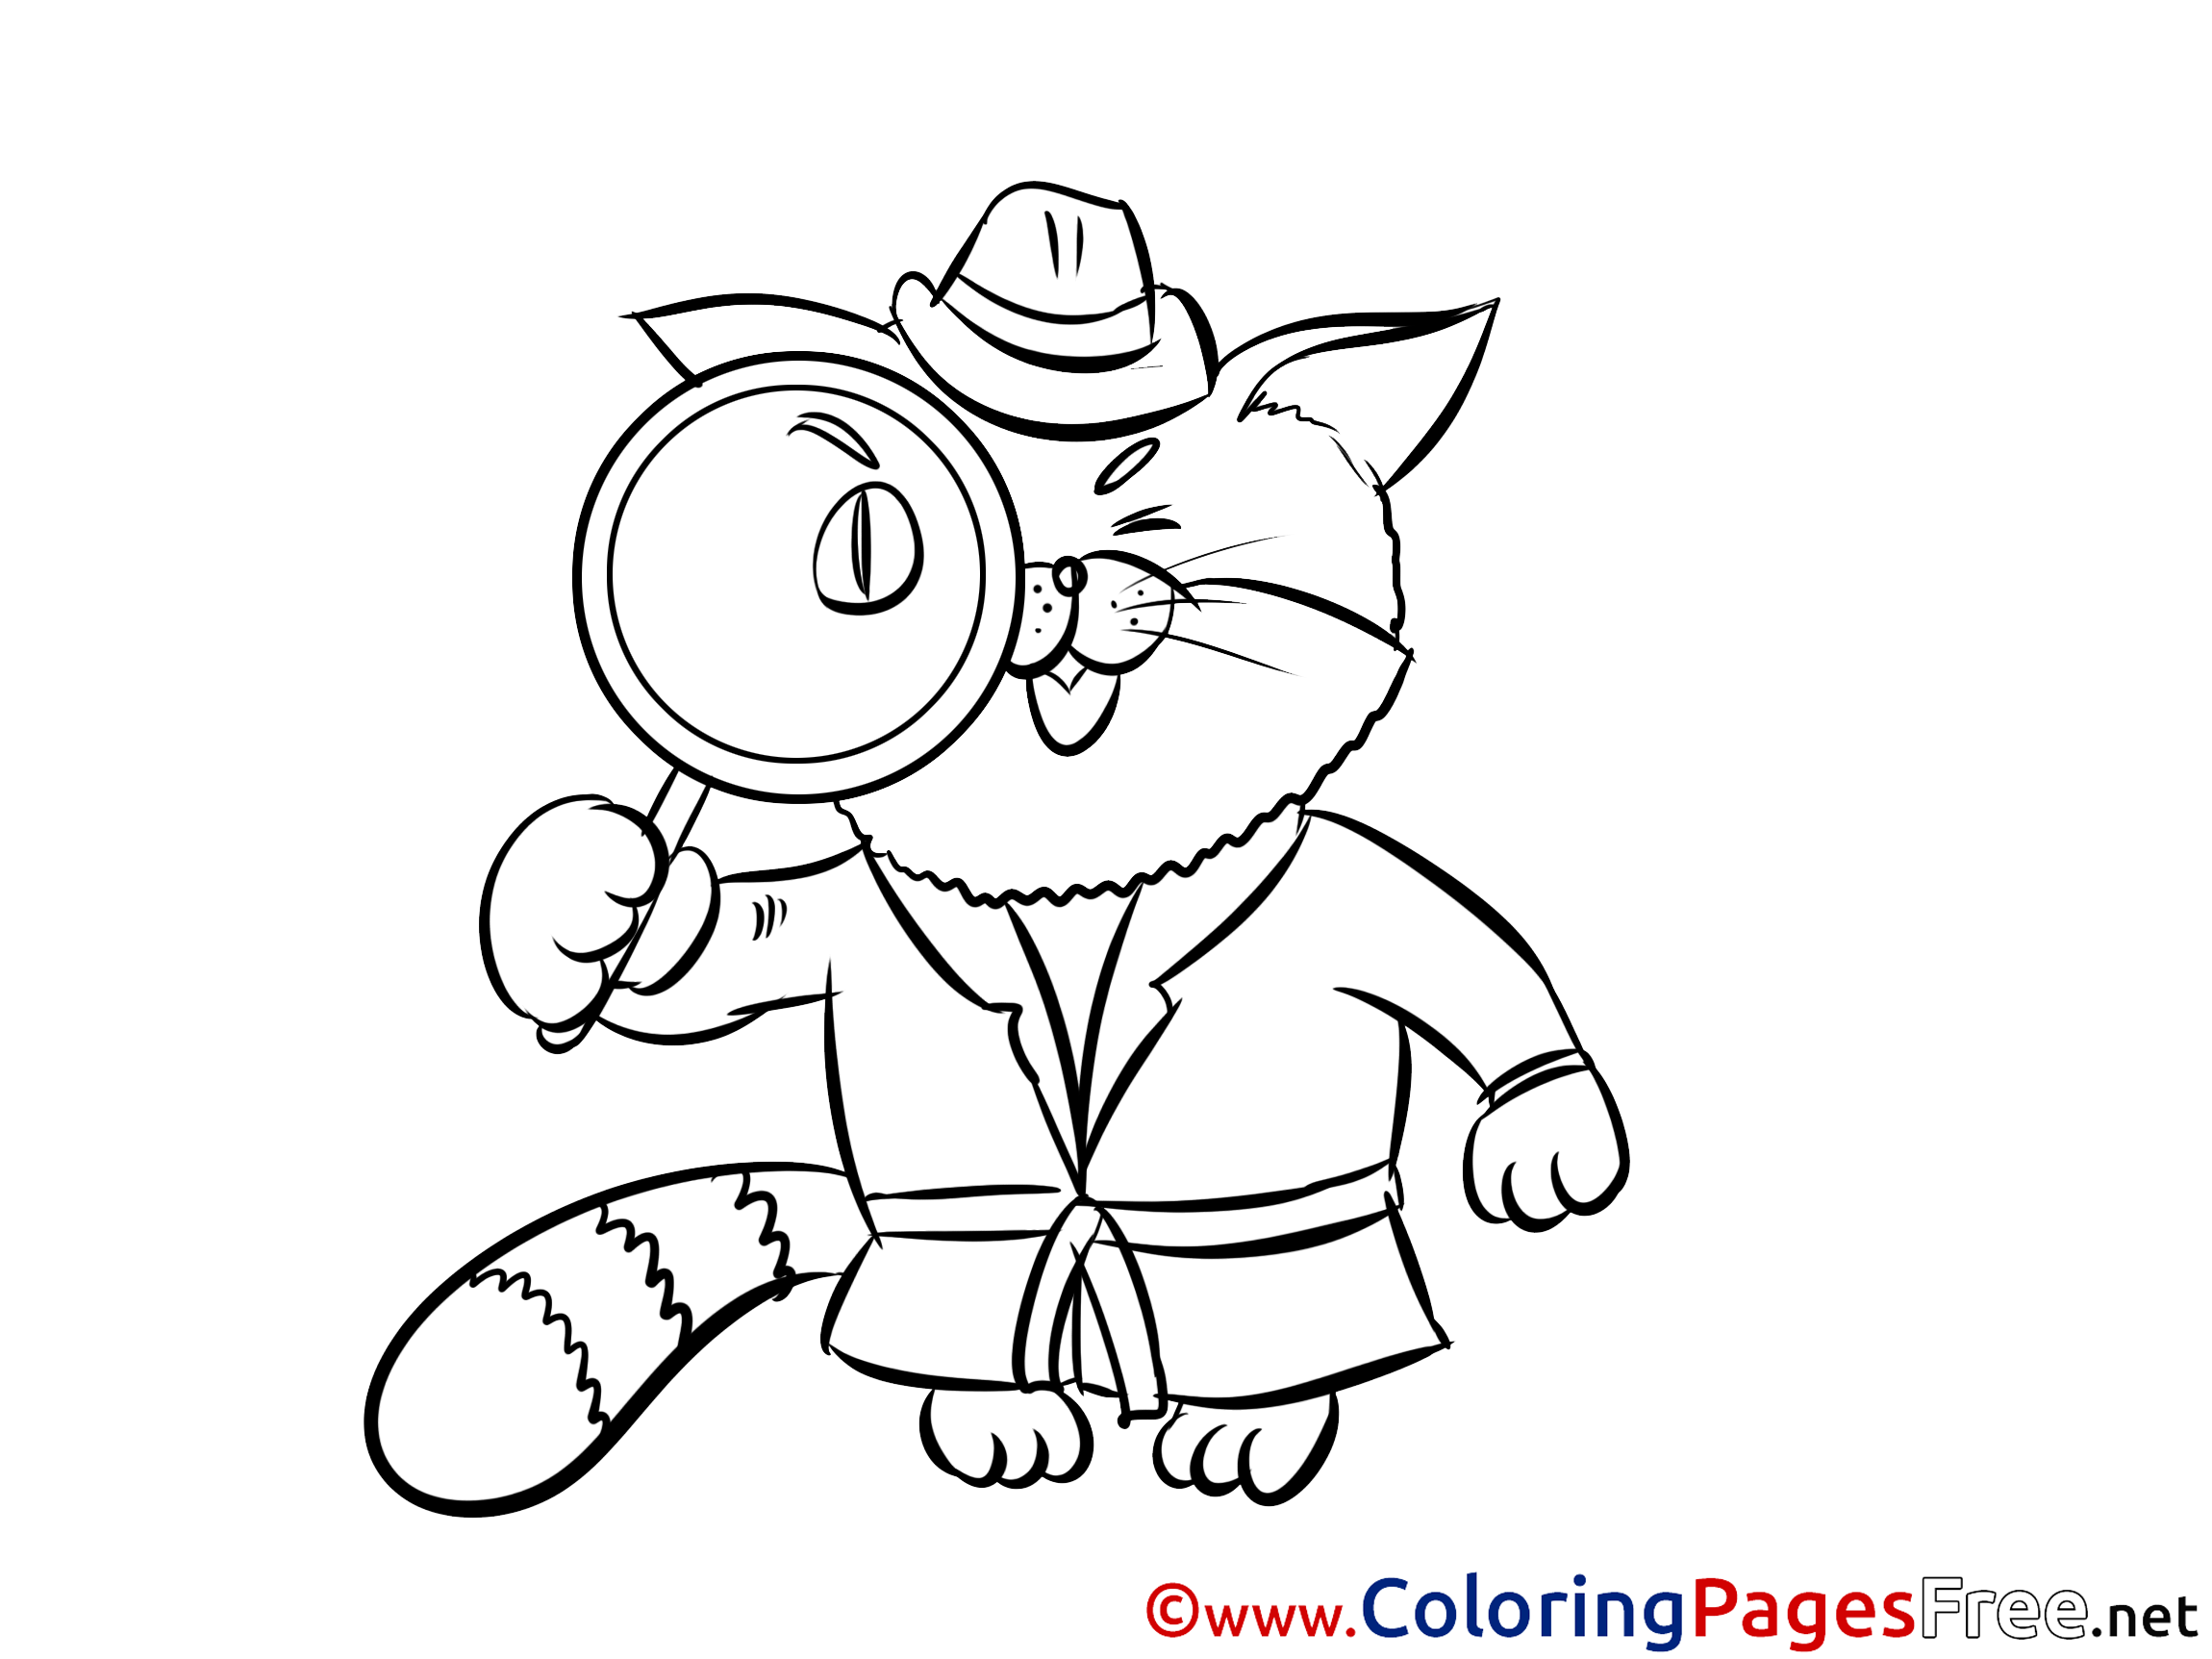 Cat Detective for free Coloring Pages download